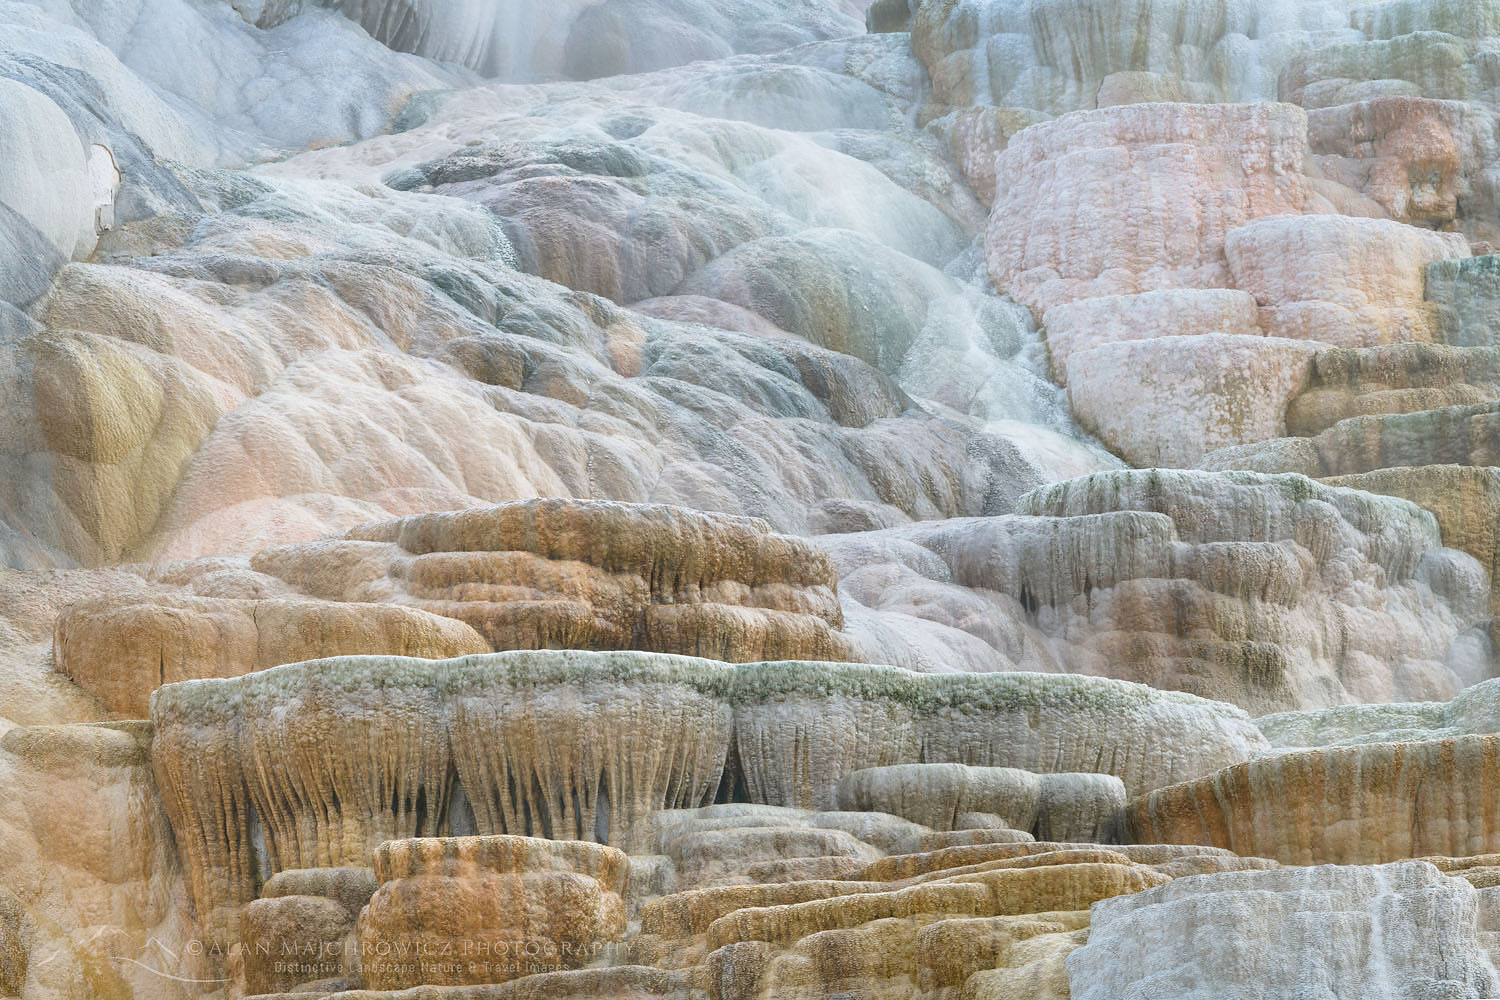 Palette Spring Terraces composed of travertine deposits colored by thermophilic bacteria. Mammtoth Hot Springs, Yellowstone National Park #68001